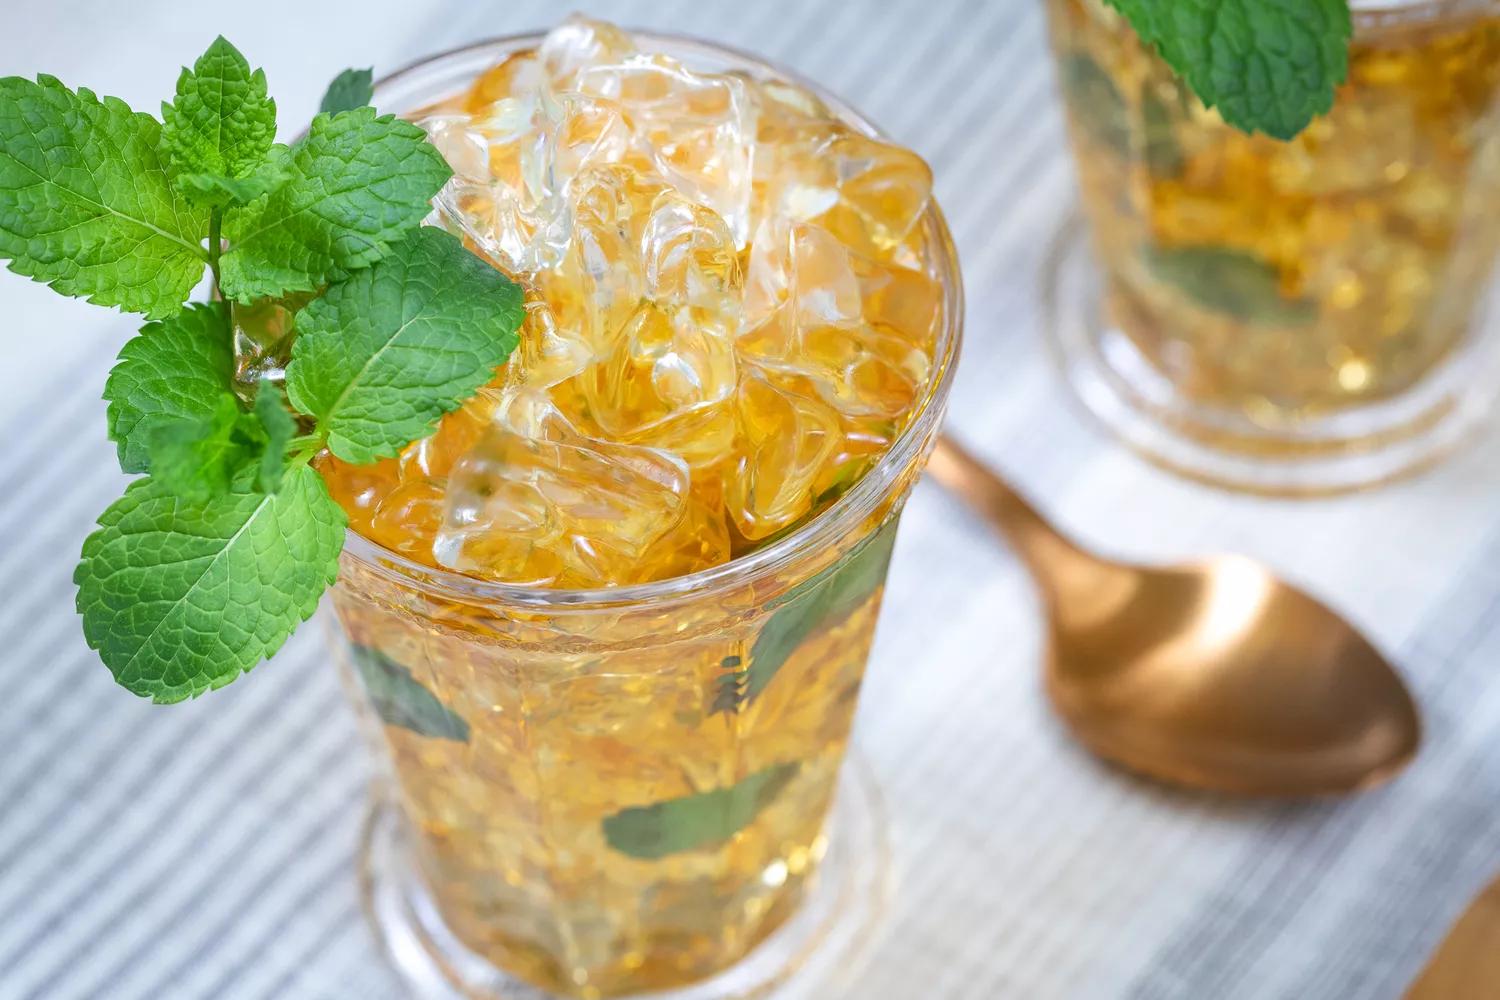 Mai Tai or Mint Julep cocktail using crushed ice